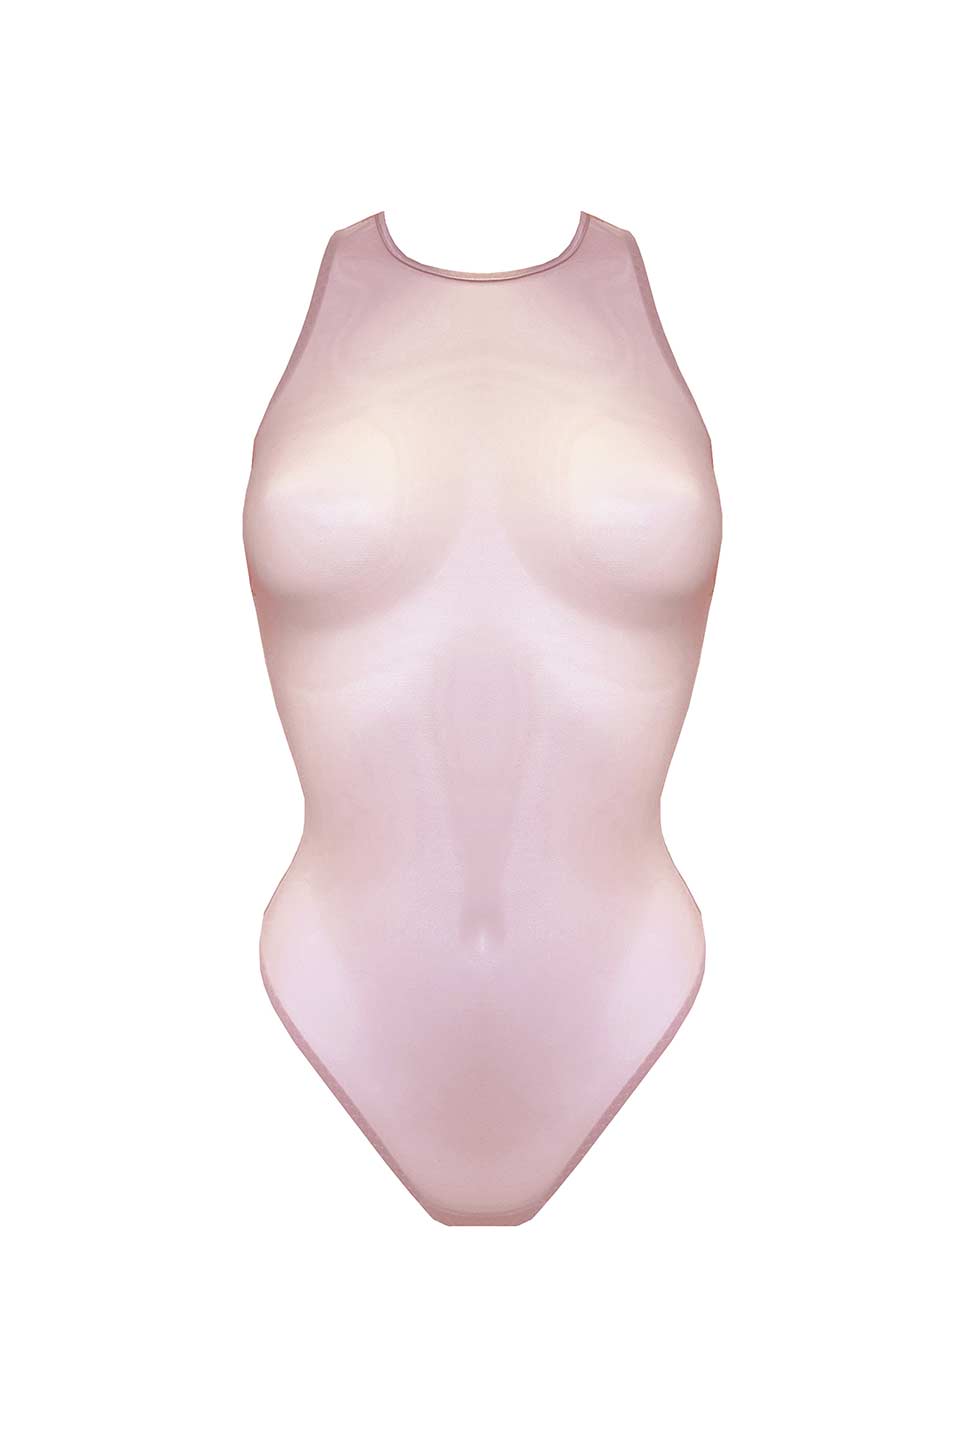 Thumbnail for Product gallery 1, Kora Body Rose